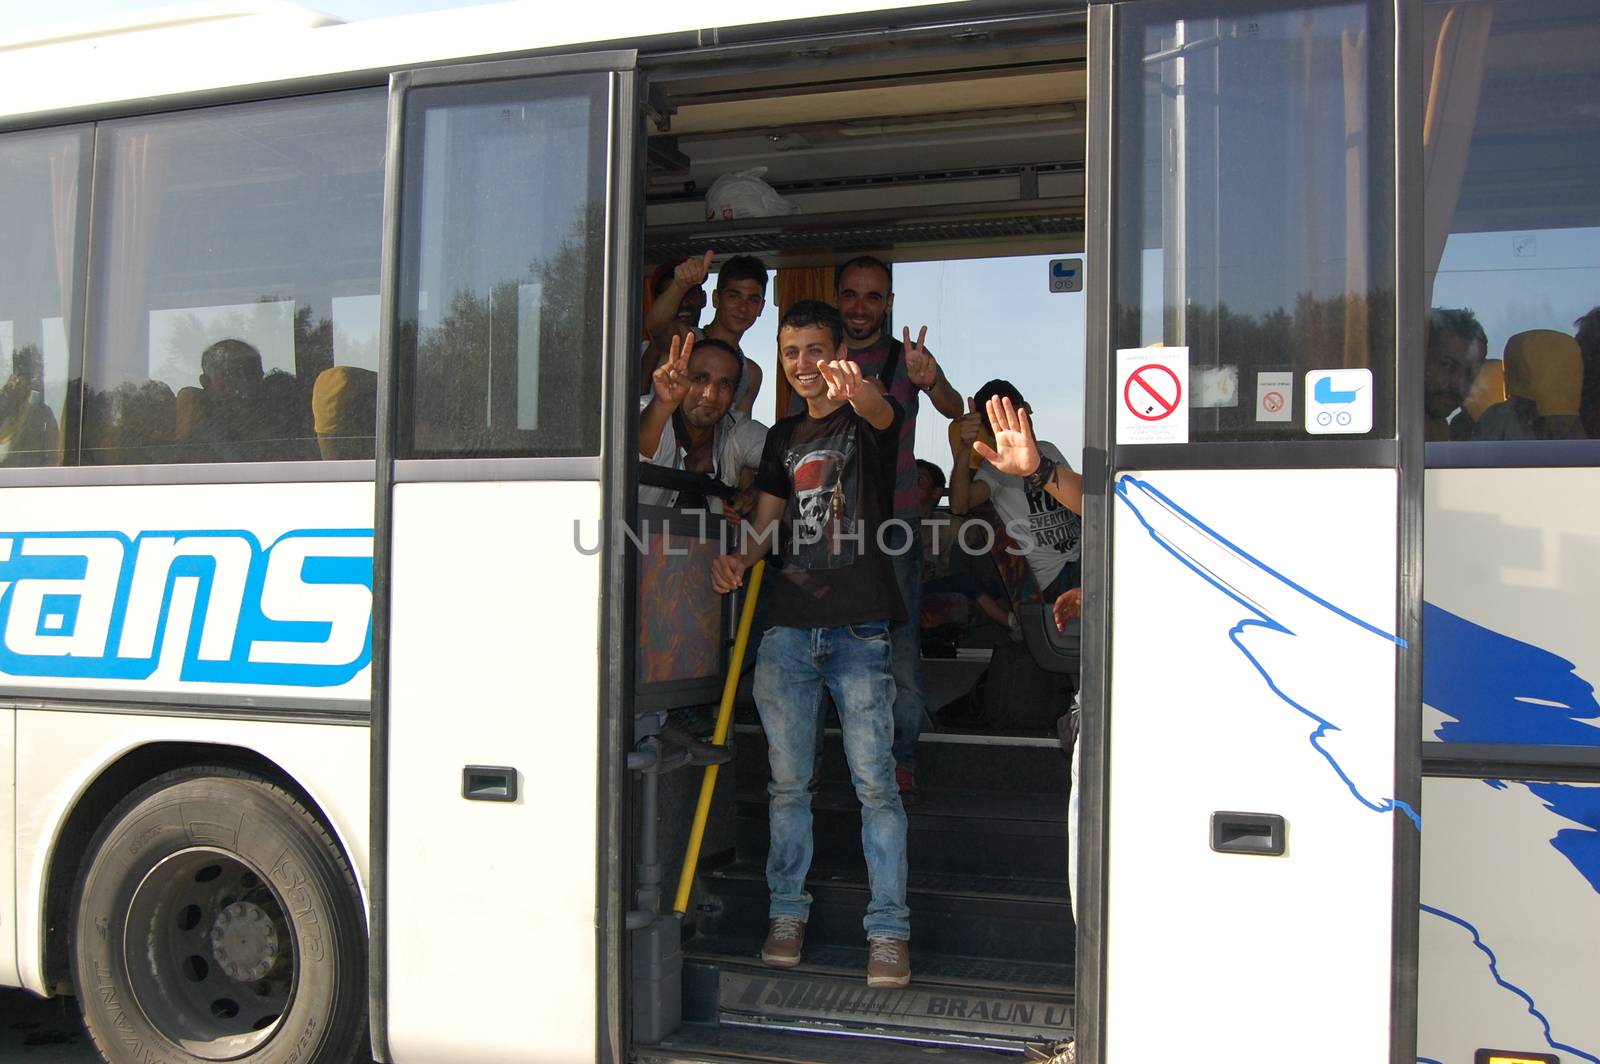 SERBIA, Border with Croatia: Refugees aboard a bus wave as hundreds are  stranded at the Serbian-Croatian border on September 18, 2015 after Croatia decided to shut their border with Serbia.This decision was made after more than 11,000 refugees entered Croatia in a single day. Refugees had to spend entire night and half of the next day at the border. Local authorities in Serbia have organized bus transportation to take the refugees from the border to the reception camps.